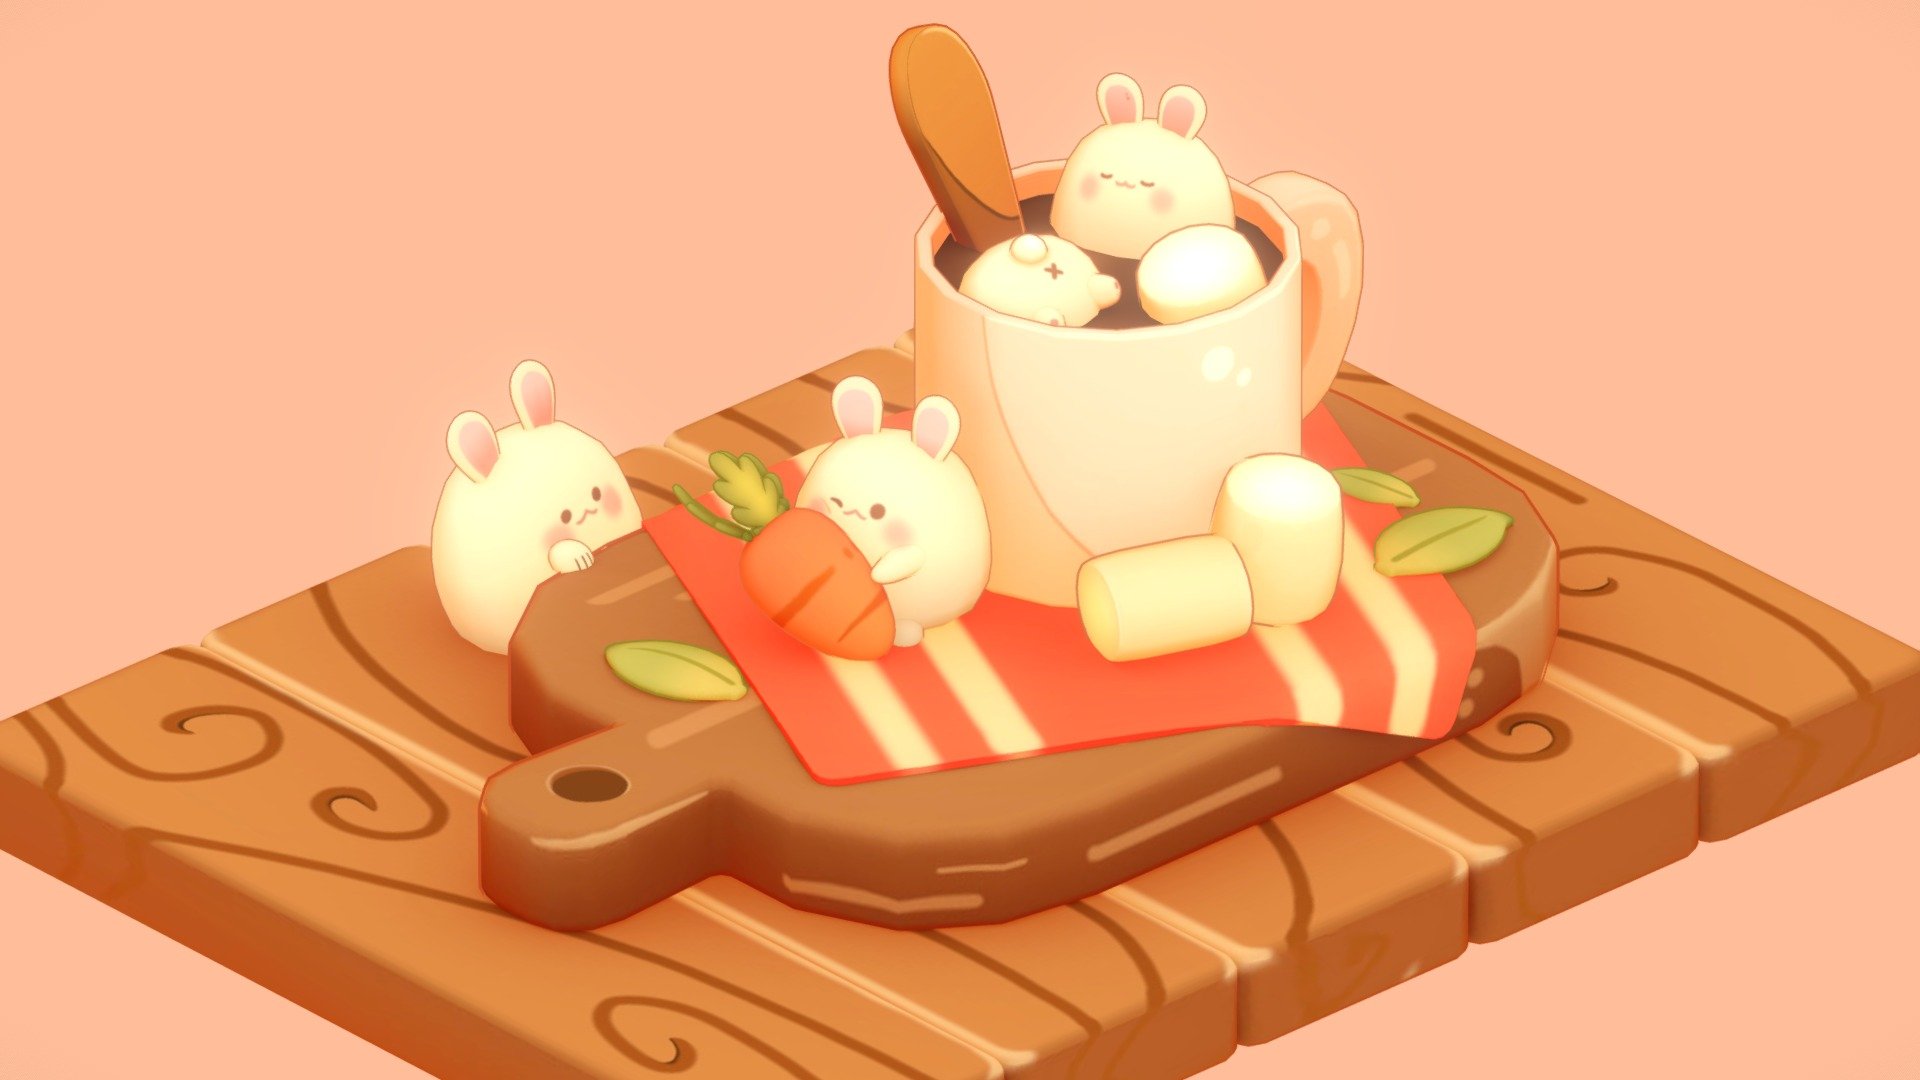 who wants a cup of chocolate?

Texturing practice using a digital tablet.

Modeling in Blender, texturing in substance painter

Based on the art of Chiai_tea, Instagram https://www.instagram.com/chiai_tea/

You can also support me by giving me a coffee as a gift—https://ko-fi.com/ergoni - Choco Bunny - Download Free 3D model by Ergoni 3d model